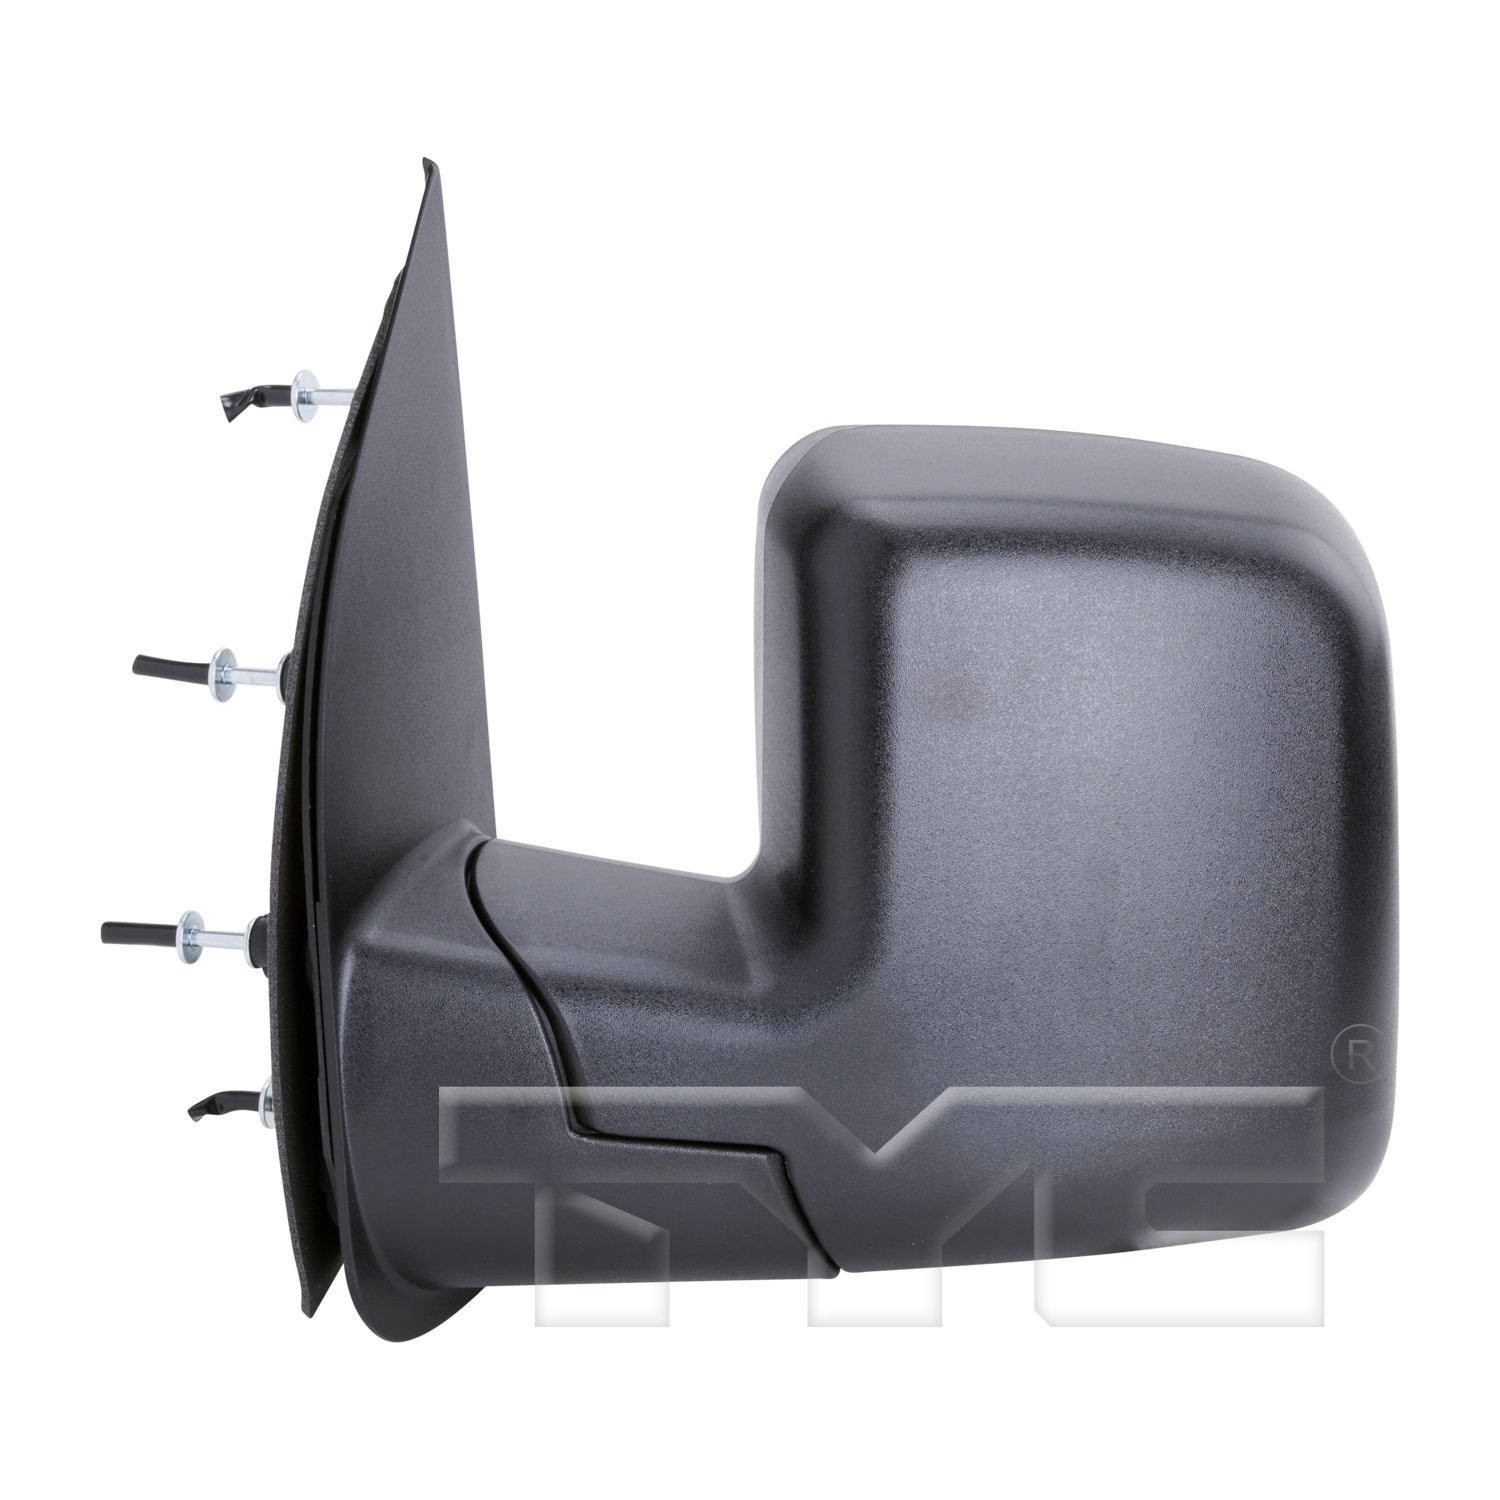 Aftermarket MIRRORS for FORD - E-550 ECONOLINE SUPER DUTY, E-550 ECONOLINE SUPER DUTY,02-02,LT Mirror outside rear view